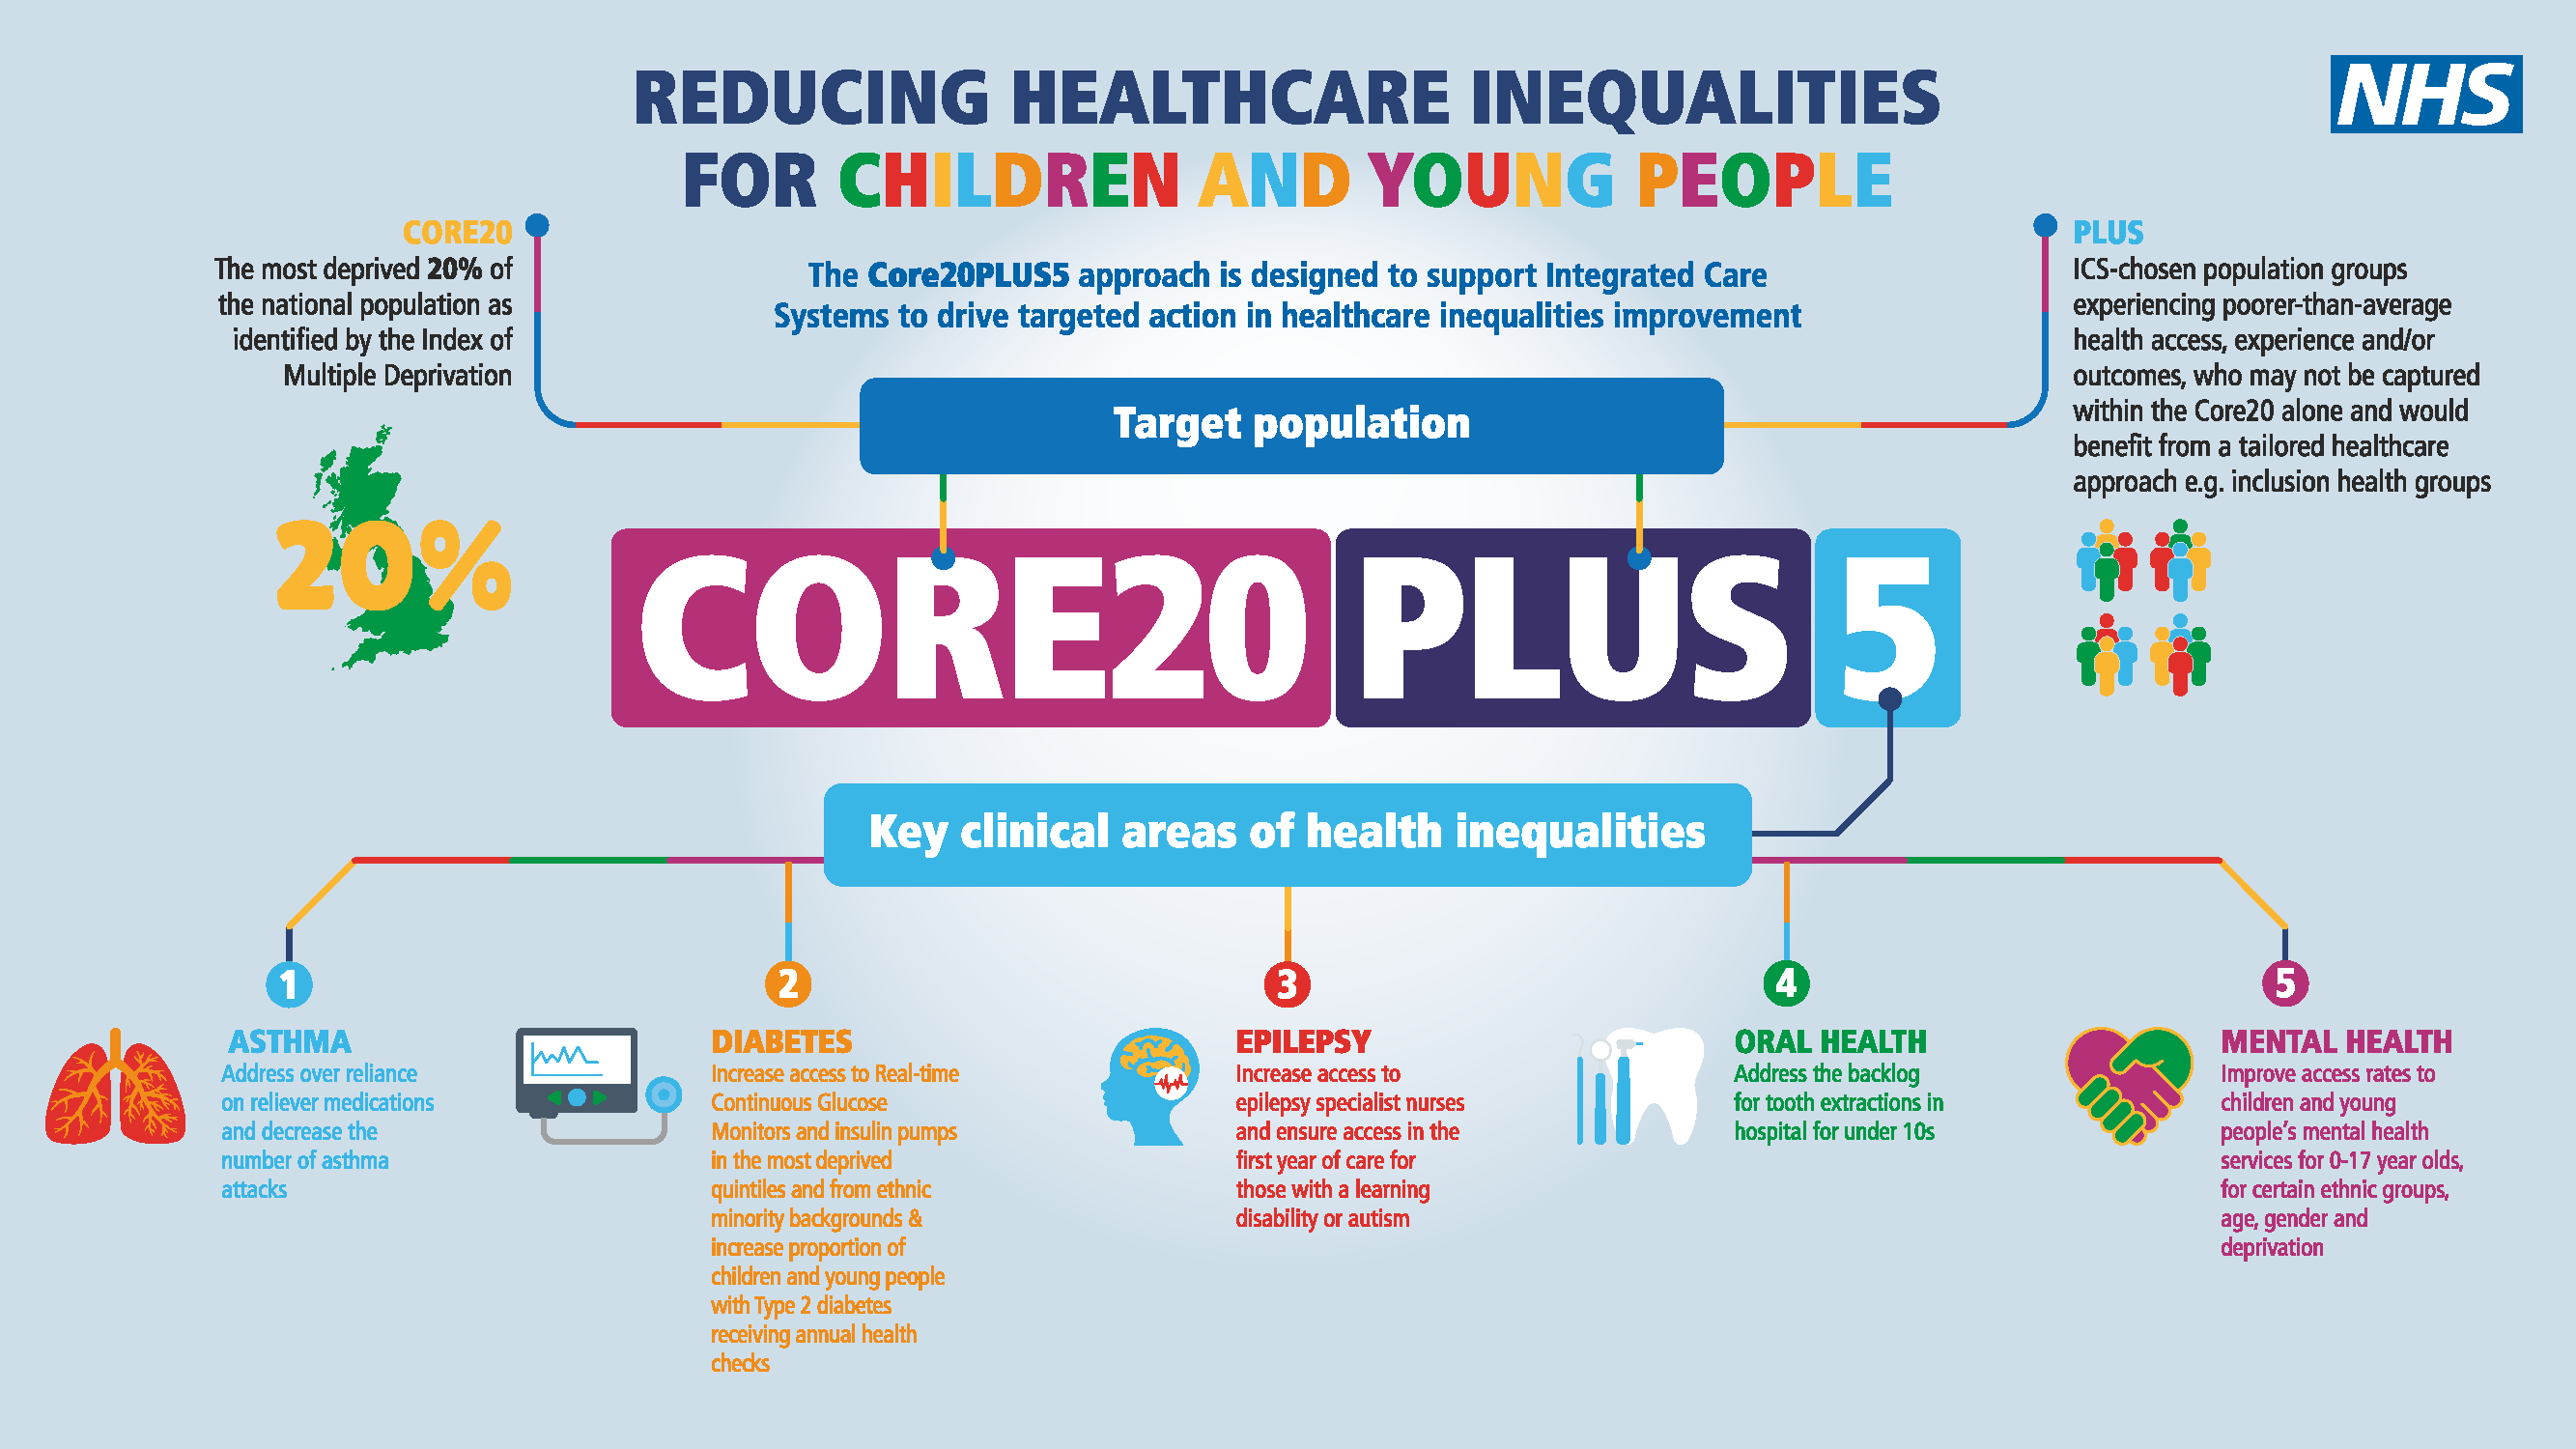 Core20PLUS5 is a national NHS England and NHS Improvement approach which identifies the most deprived 20% of the national population as identified by the national Index of Multiple Deprivation. PLUS population groups experiencing poorer-than-average health access and/or outcomes. The final part sets out five clinical areas of focus, asthma, diabetes, epilepsy, oral health, mental health.